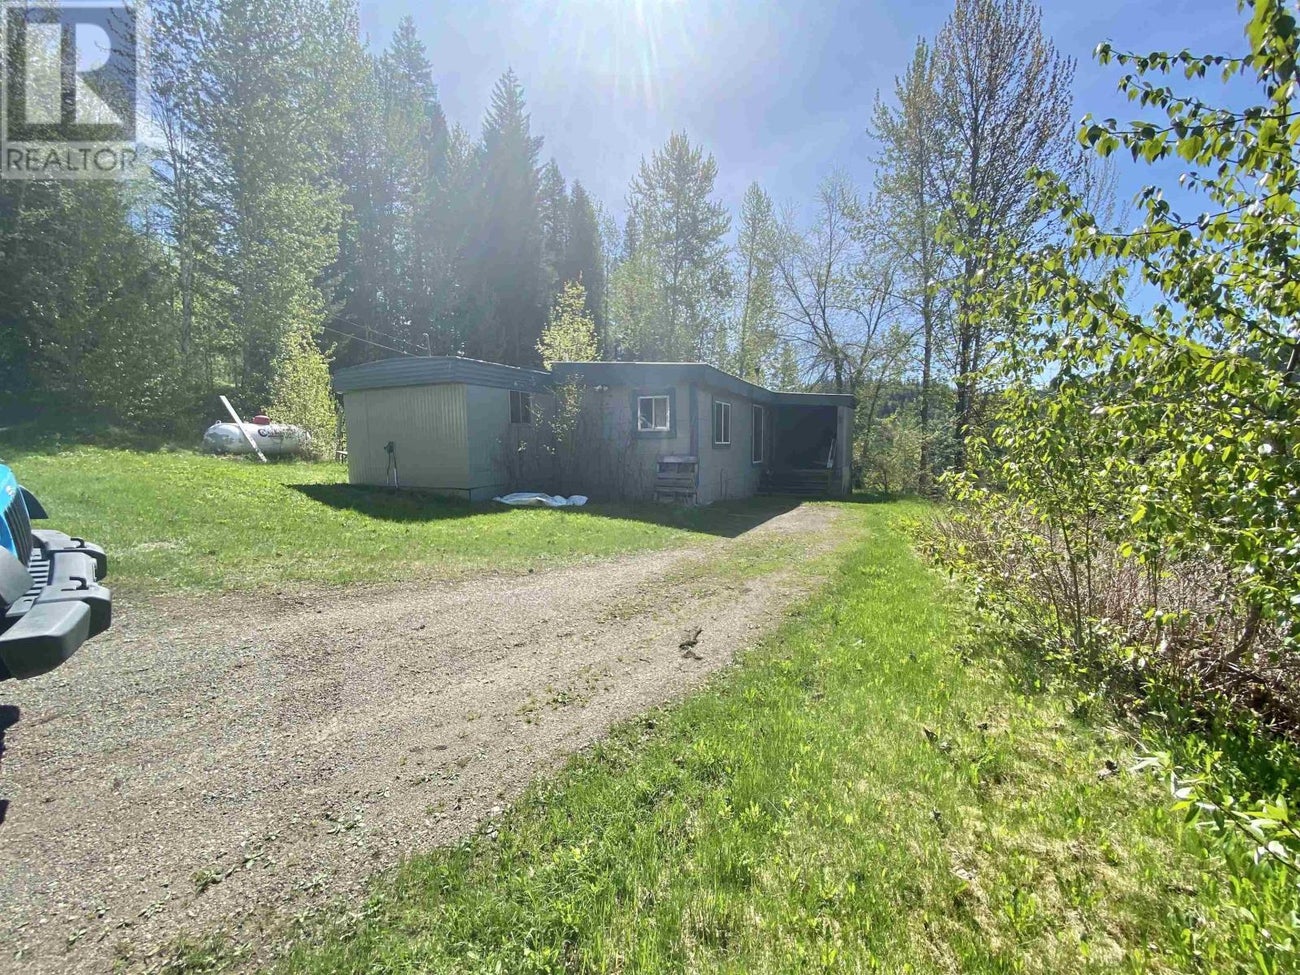 6313 ROSETTE LAKE ROAD - Likely for sale(R2780658) #1